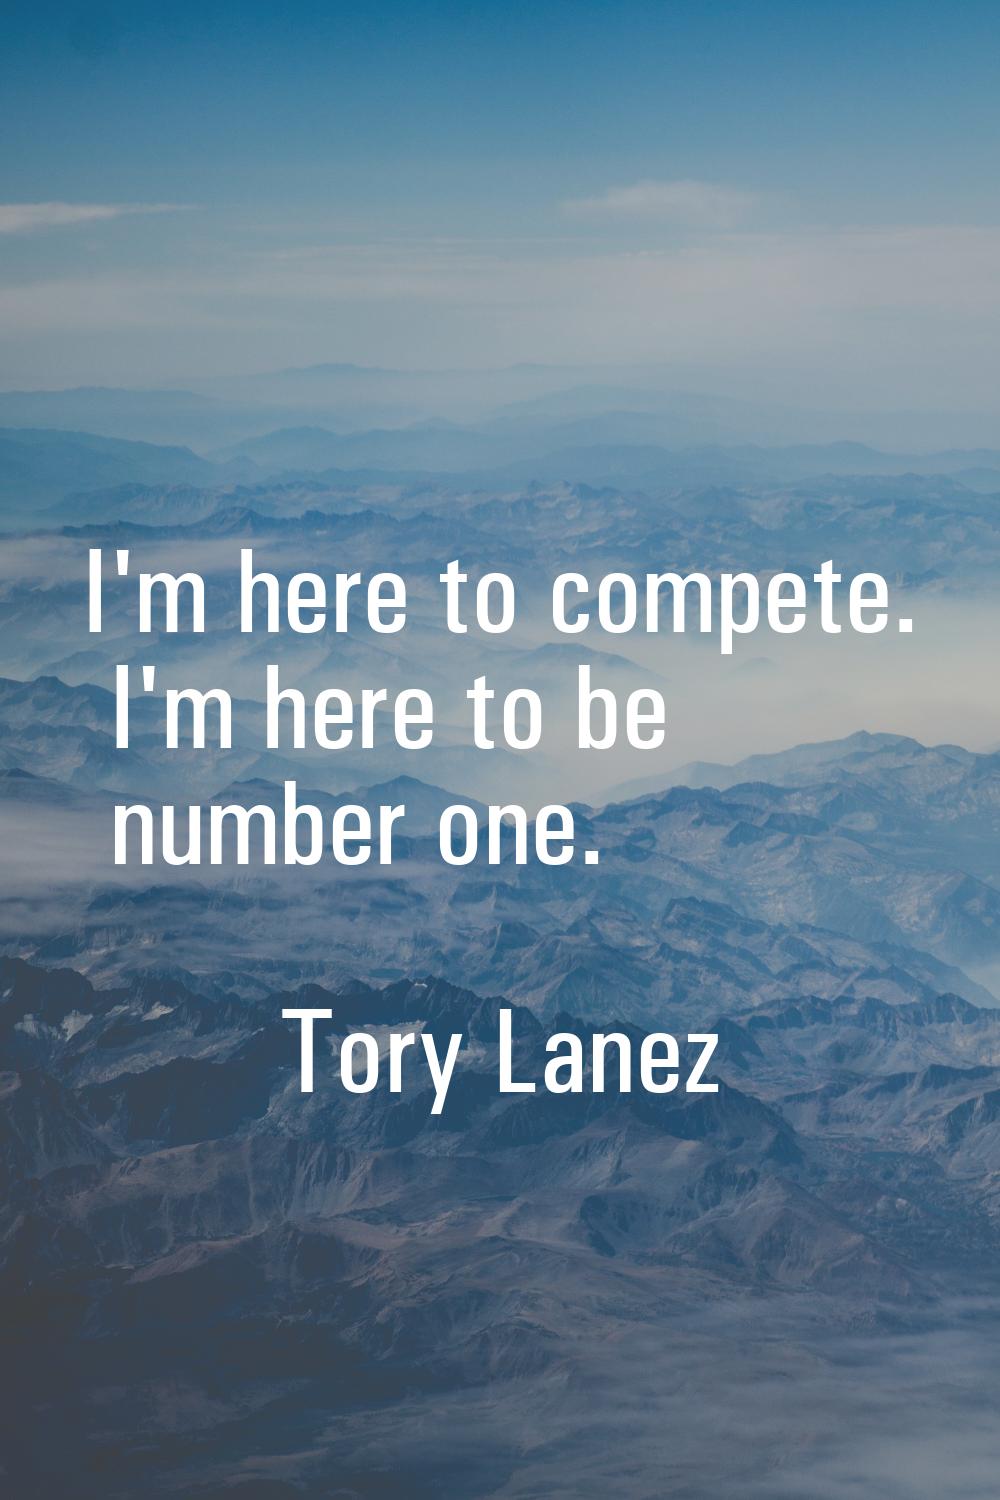 I'm here to compete. I'm here to be number one.